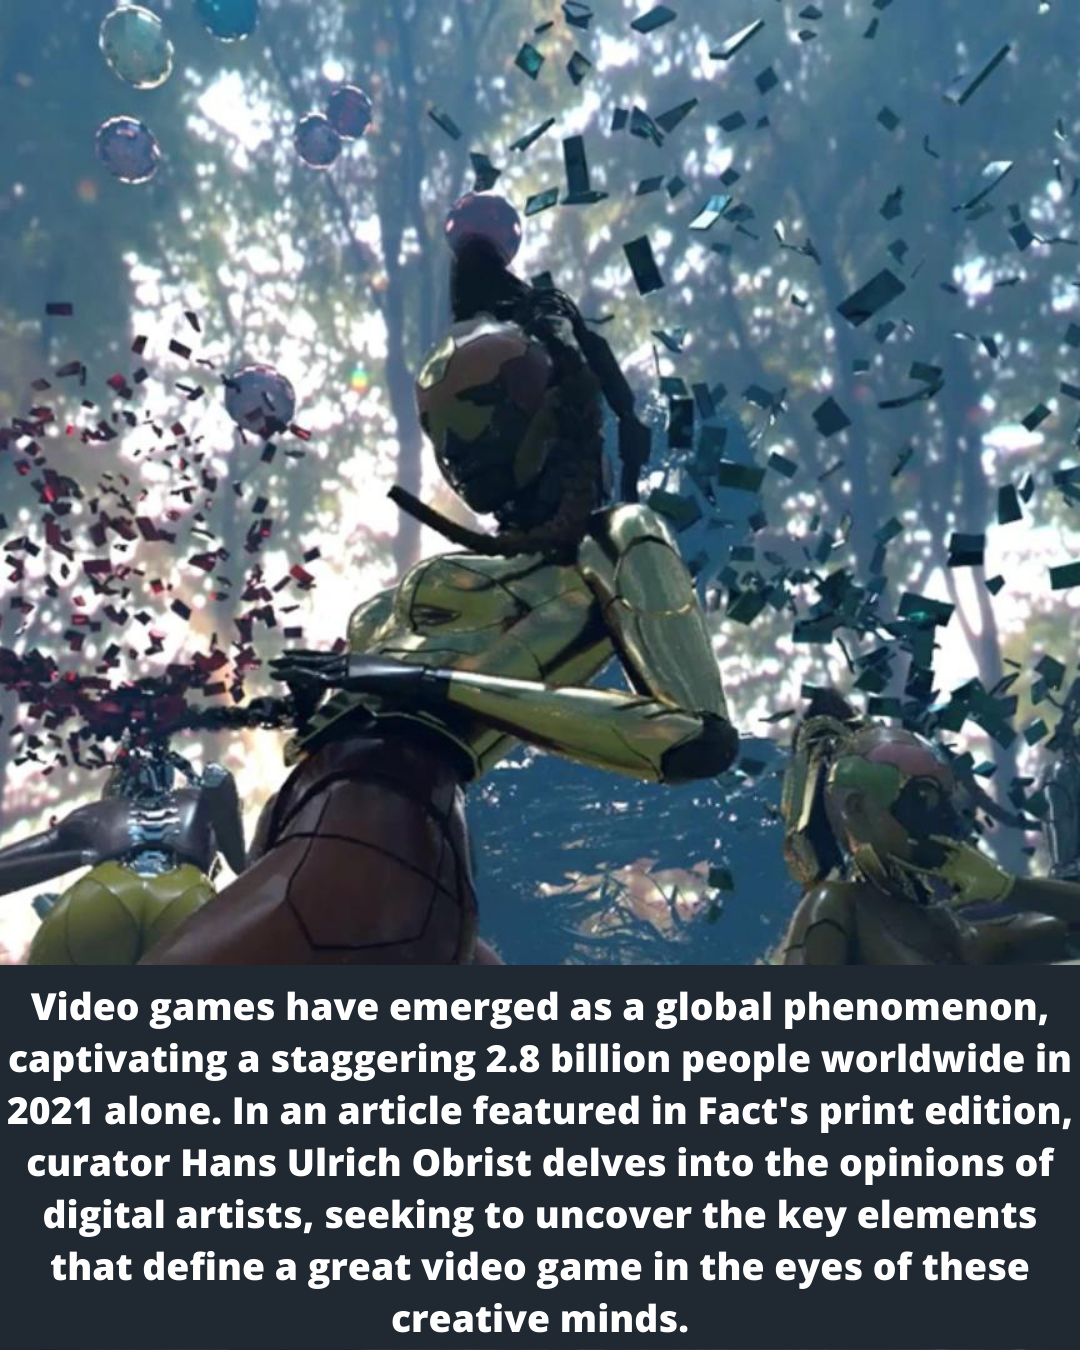 i EE re La a ~

Video games have emerged as a global phenomenon,
captivating a staggering 2.8 billion people worldwide in
2021 alone. In an article featured in Fact's print edition,

curator Hans Ulrich Obrist delves into the opinions of

digital artists, seeking to uncover the key elements
that define a great video game in the eyes of these
creative minds.